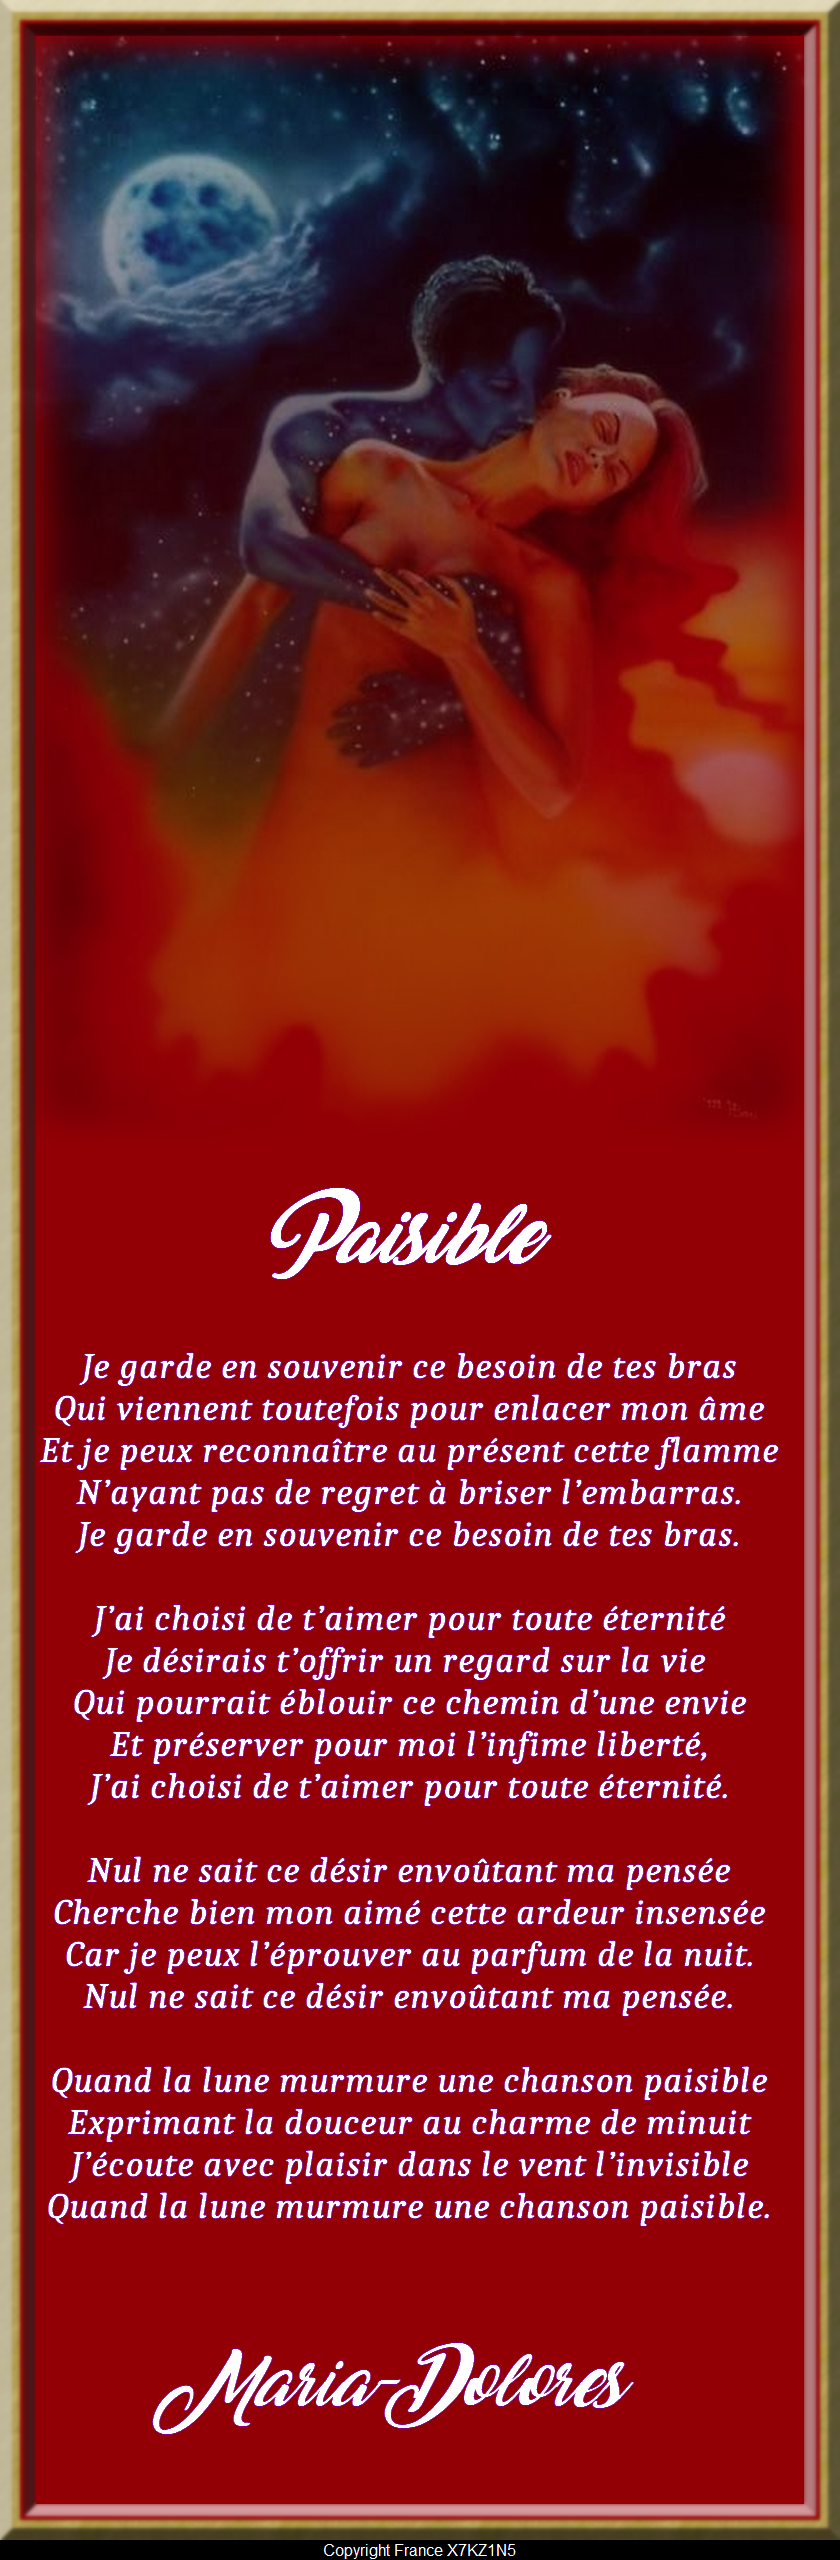 Paisible